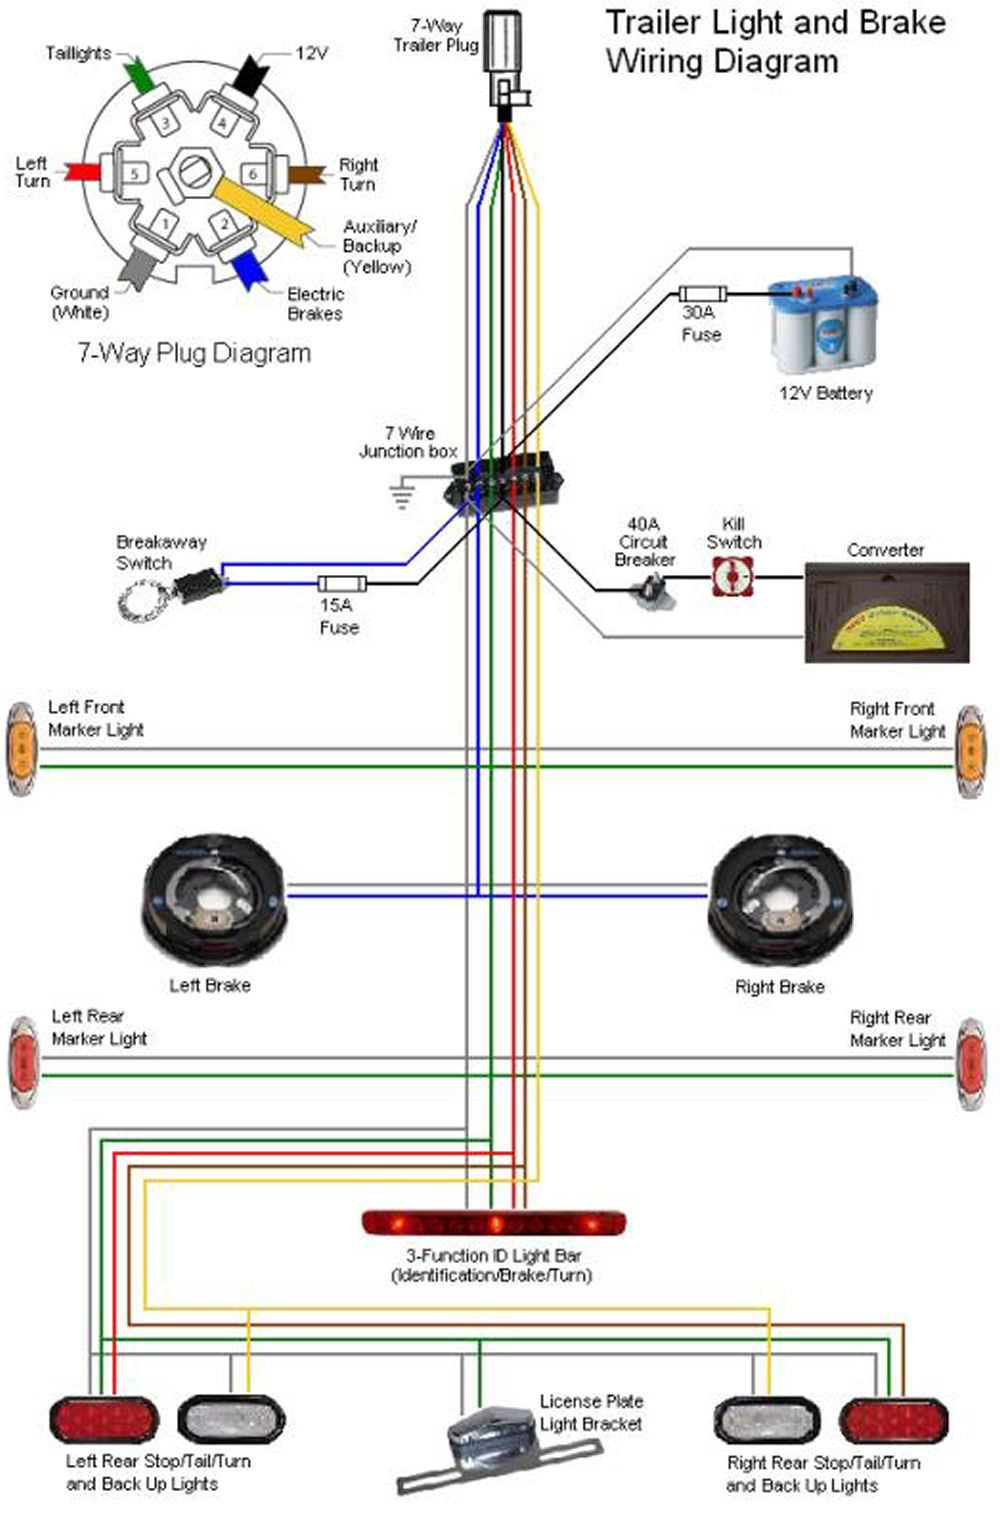 Wiring Diagram For Trailer Plug With Electric Brakes